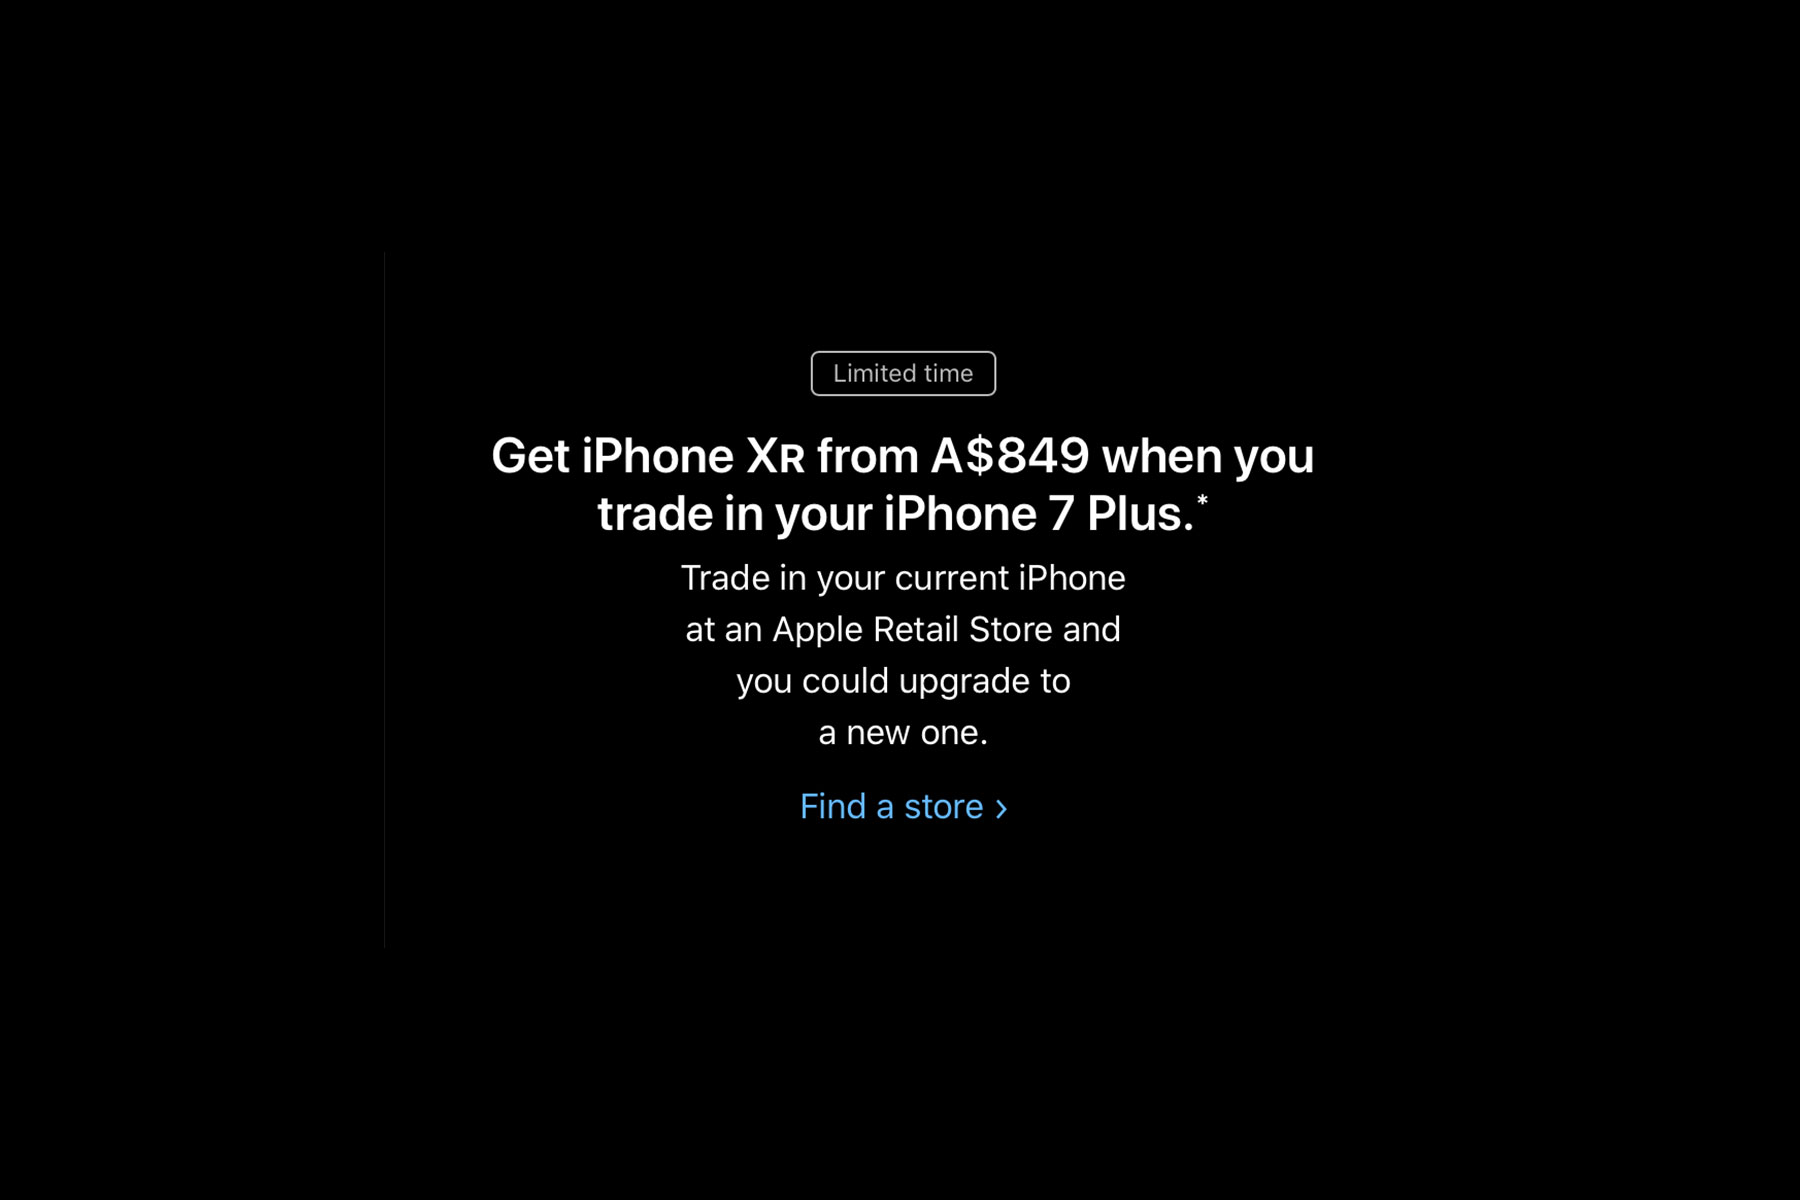 Apple-Limited-Time-iPhone-Upgrade-Offer